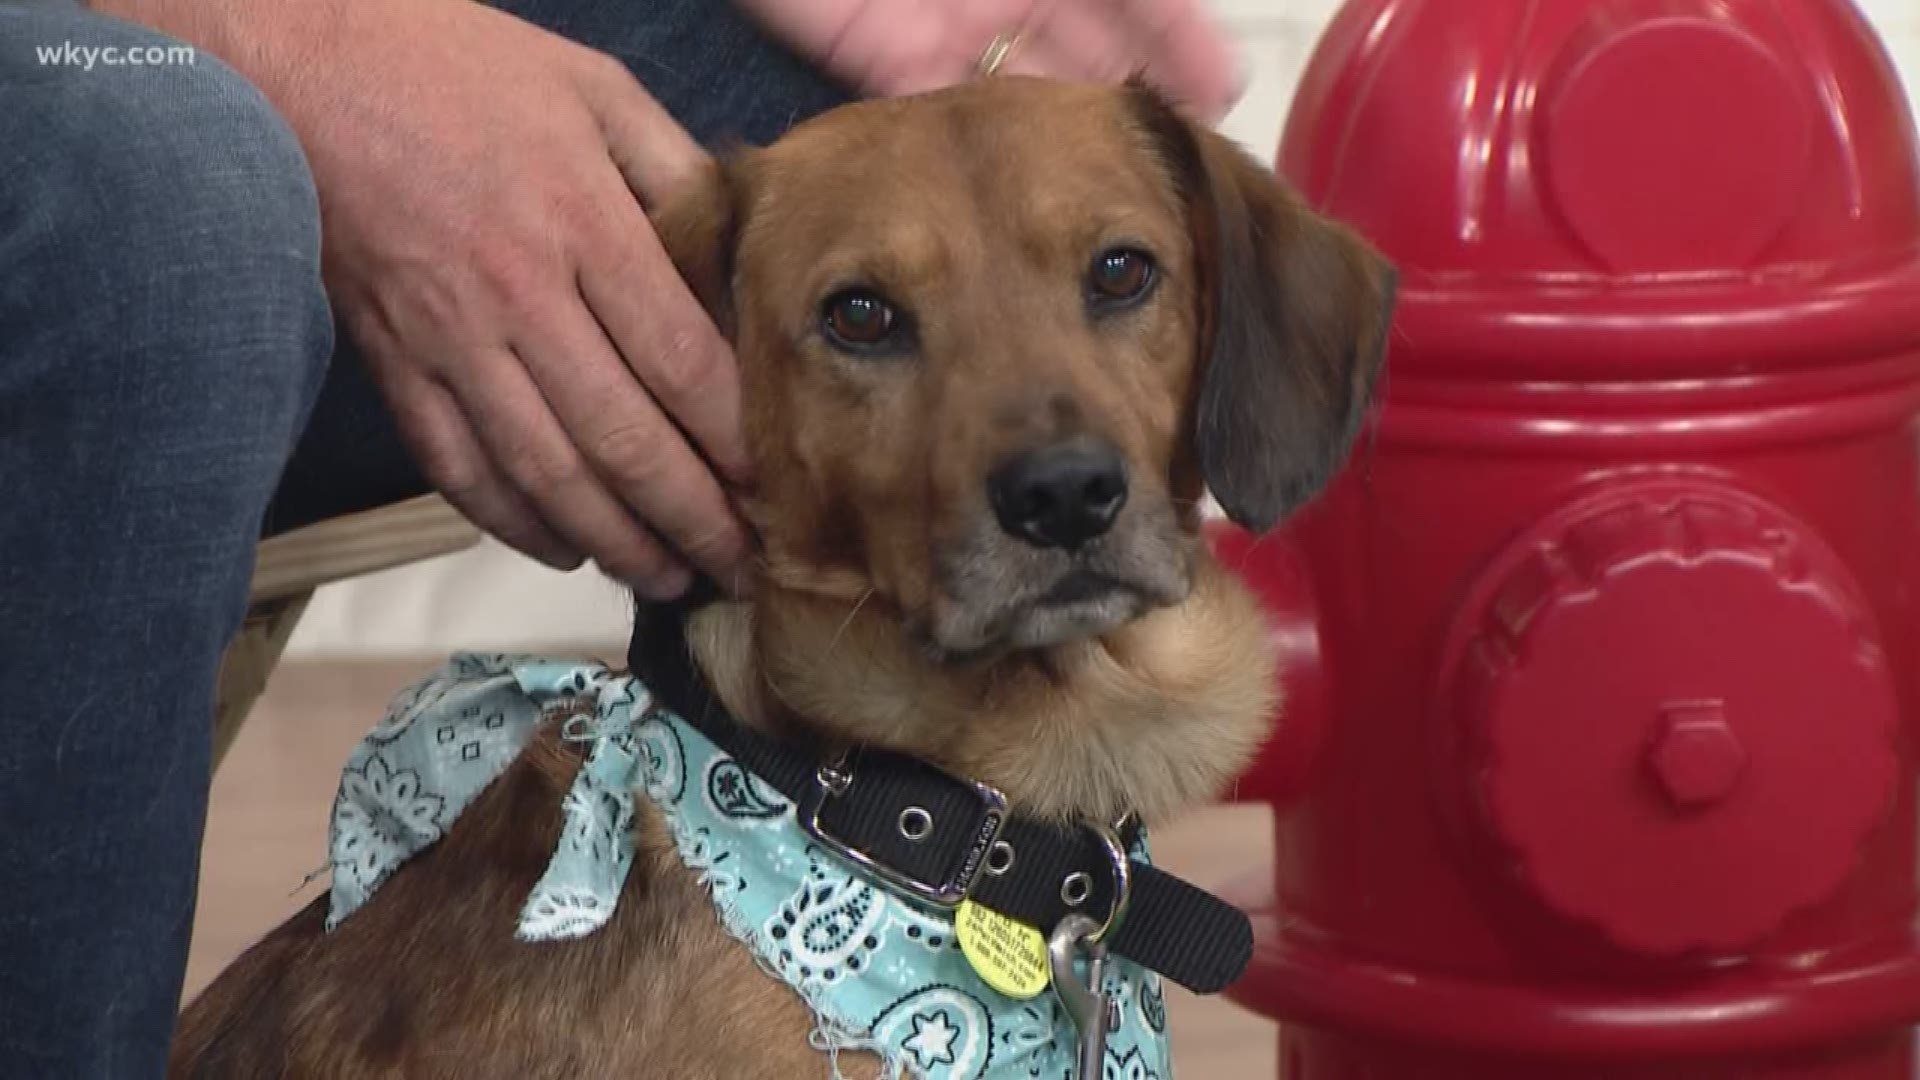 No need to test drive this Chevy, he's available for adoption. You can visit Chevy at Friendship APL. #Cleartheshelters